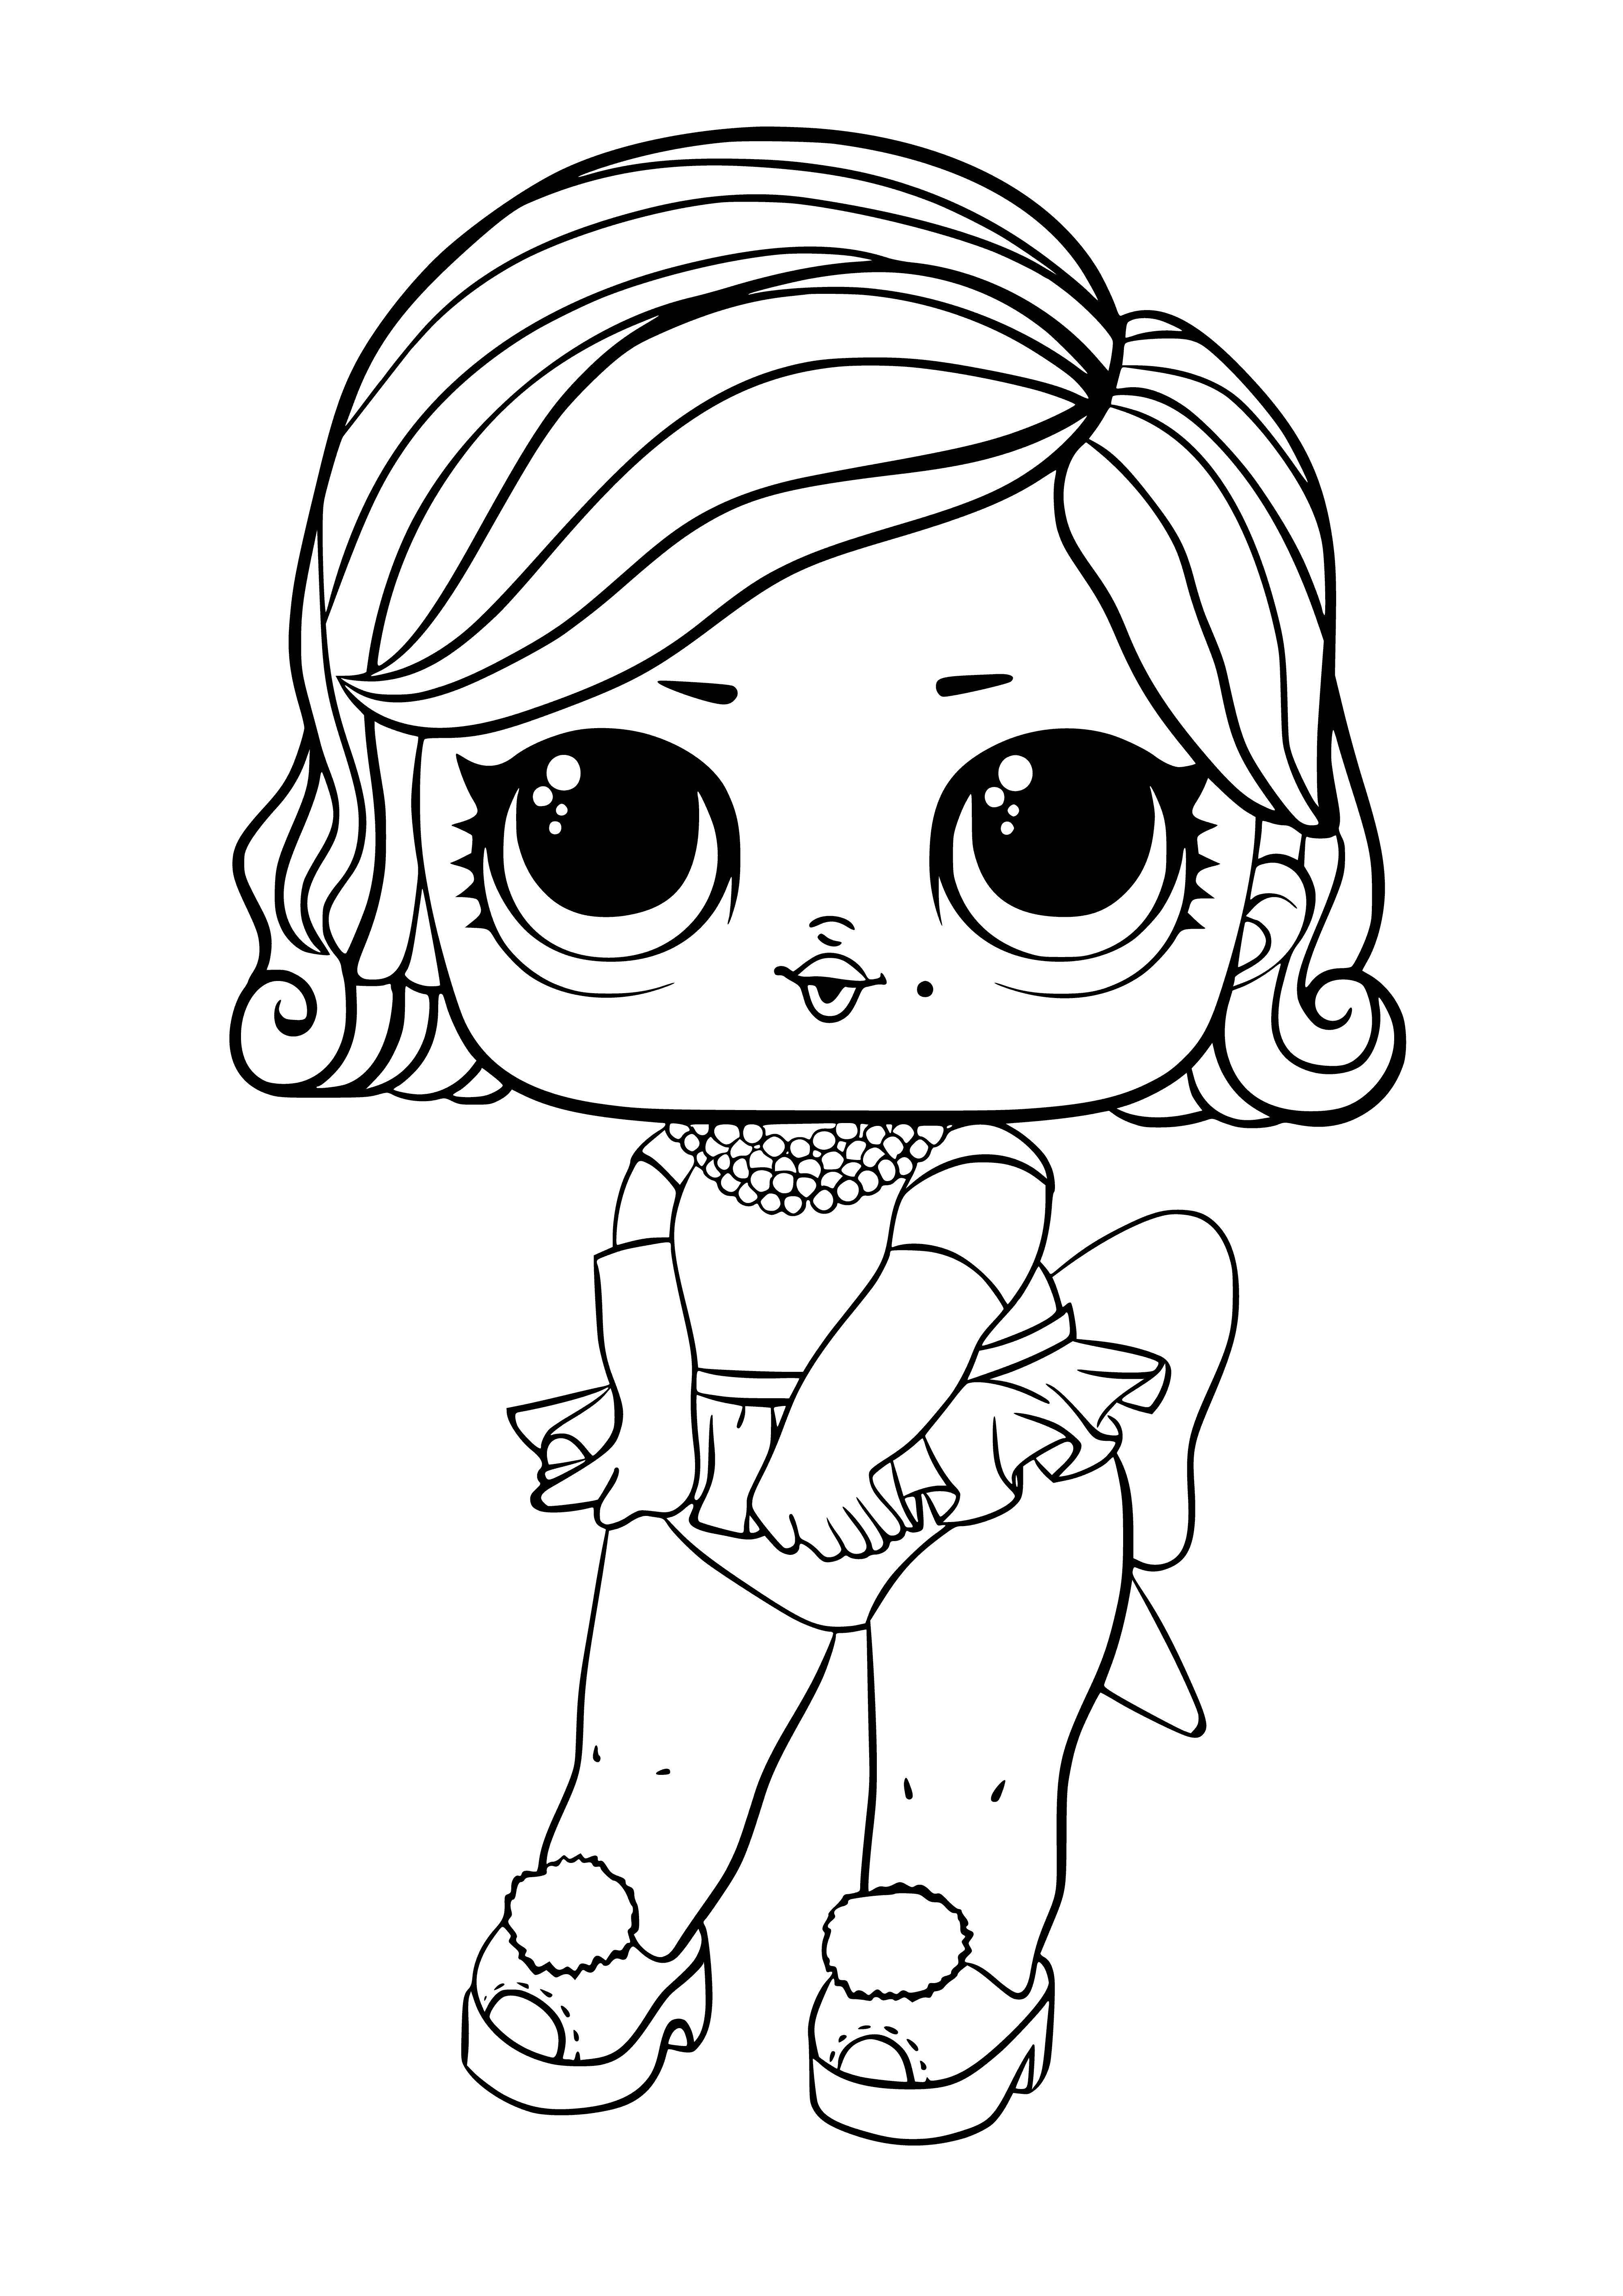 LOL Glamor Queen (Marilyn Monroe) coloring page